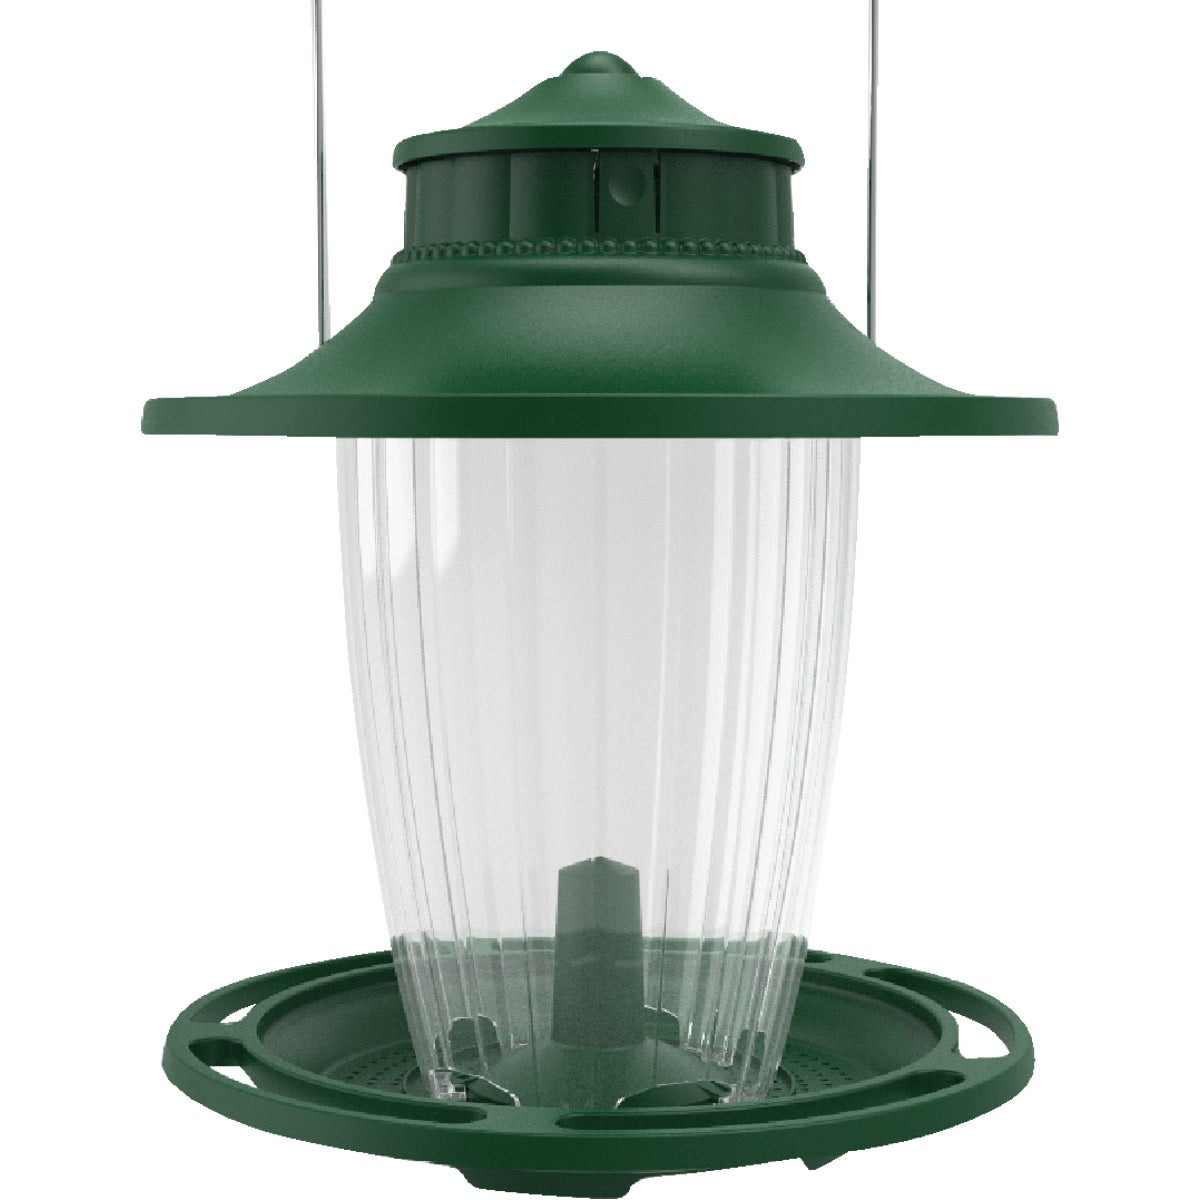 Item 704831, Round shape lantern with scalloped body has 1-touch technology.